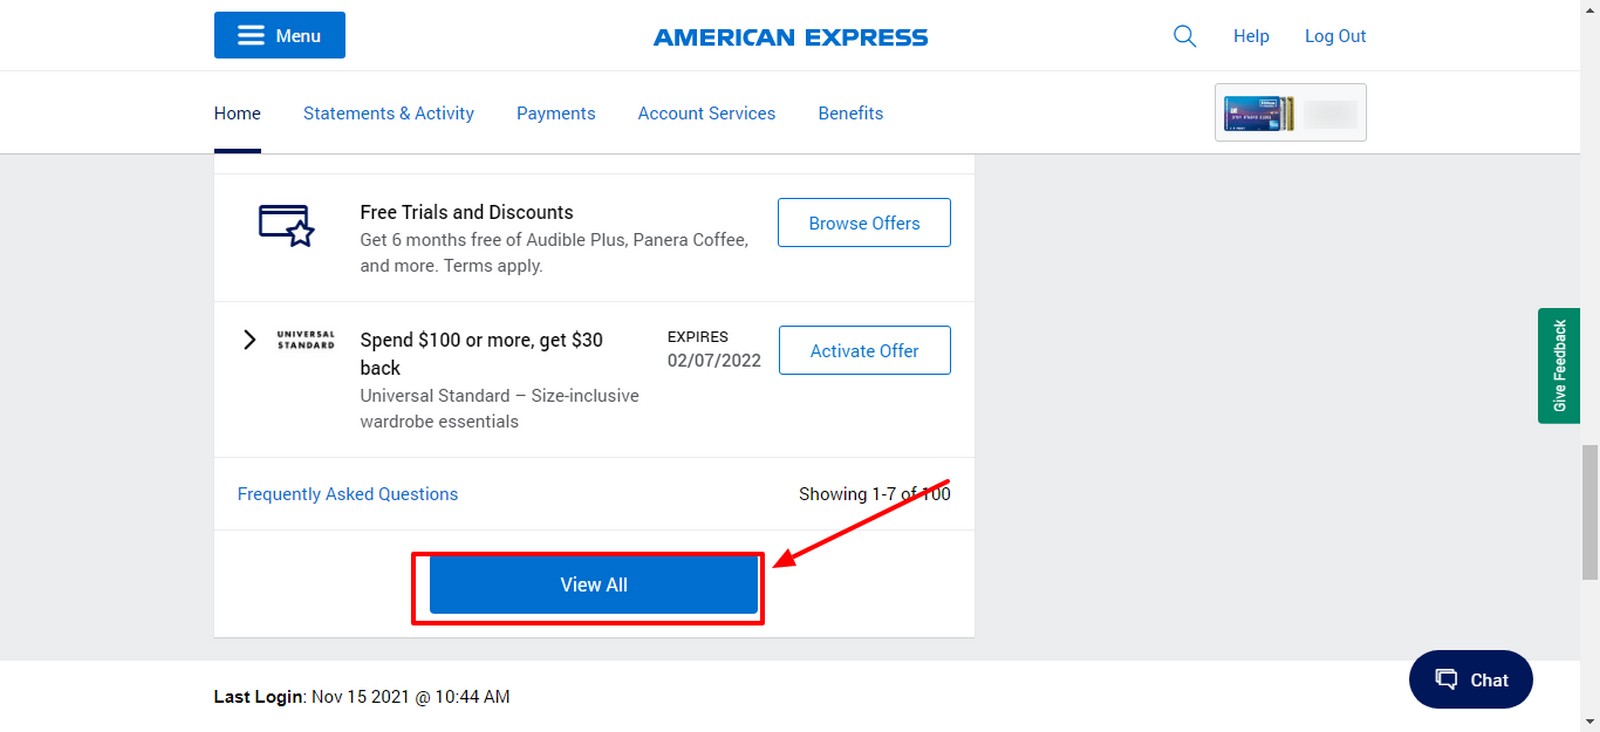 Quickly Search Amex Offers